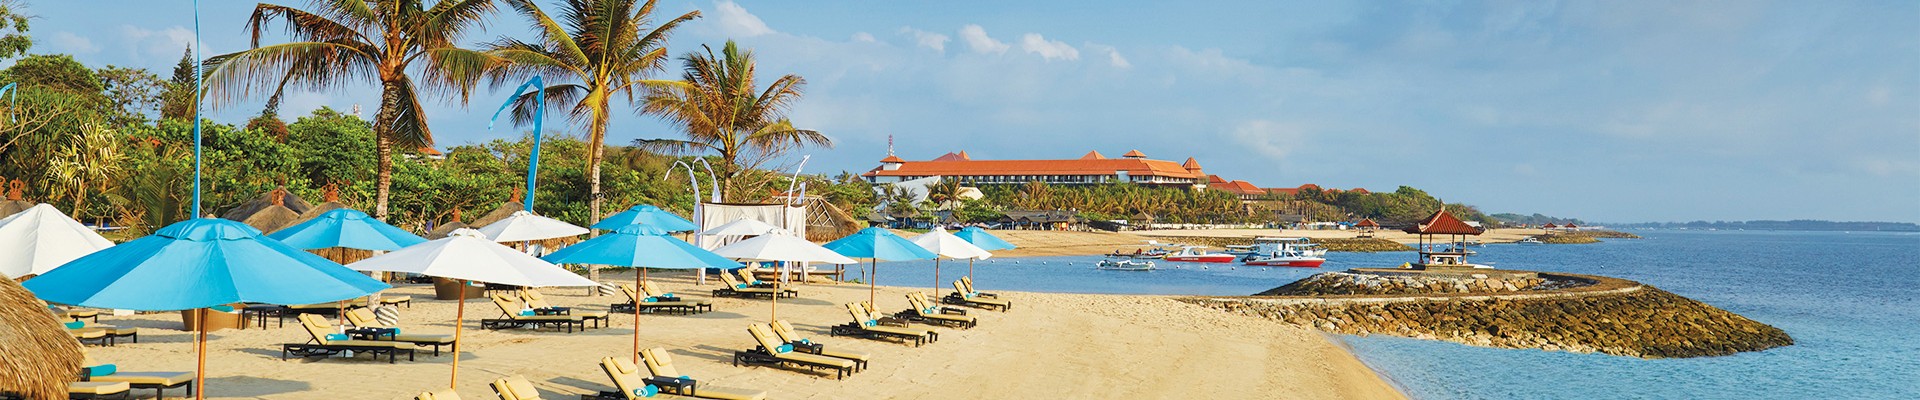 5* Sol by Melia Benoa - All Inclusive Package (7 Nights)